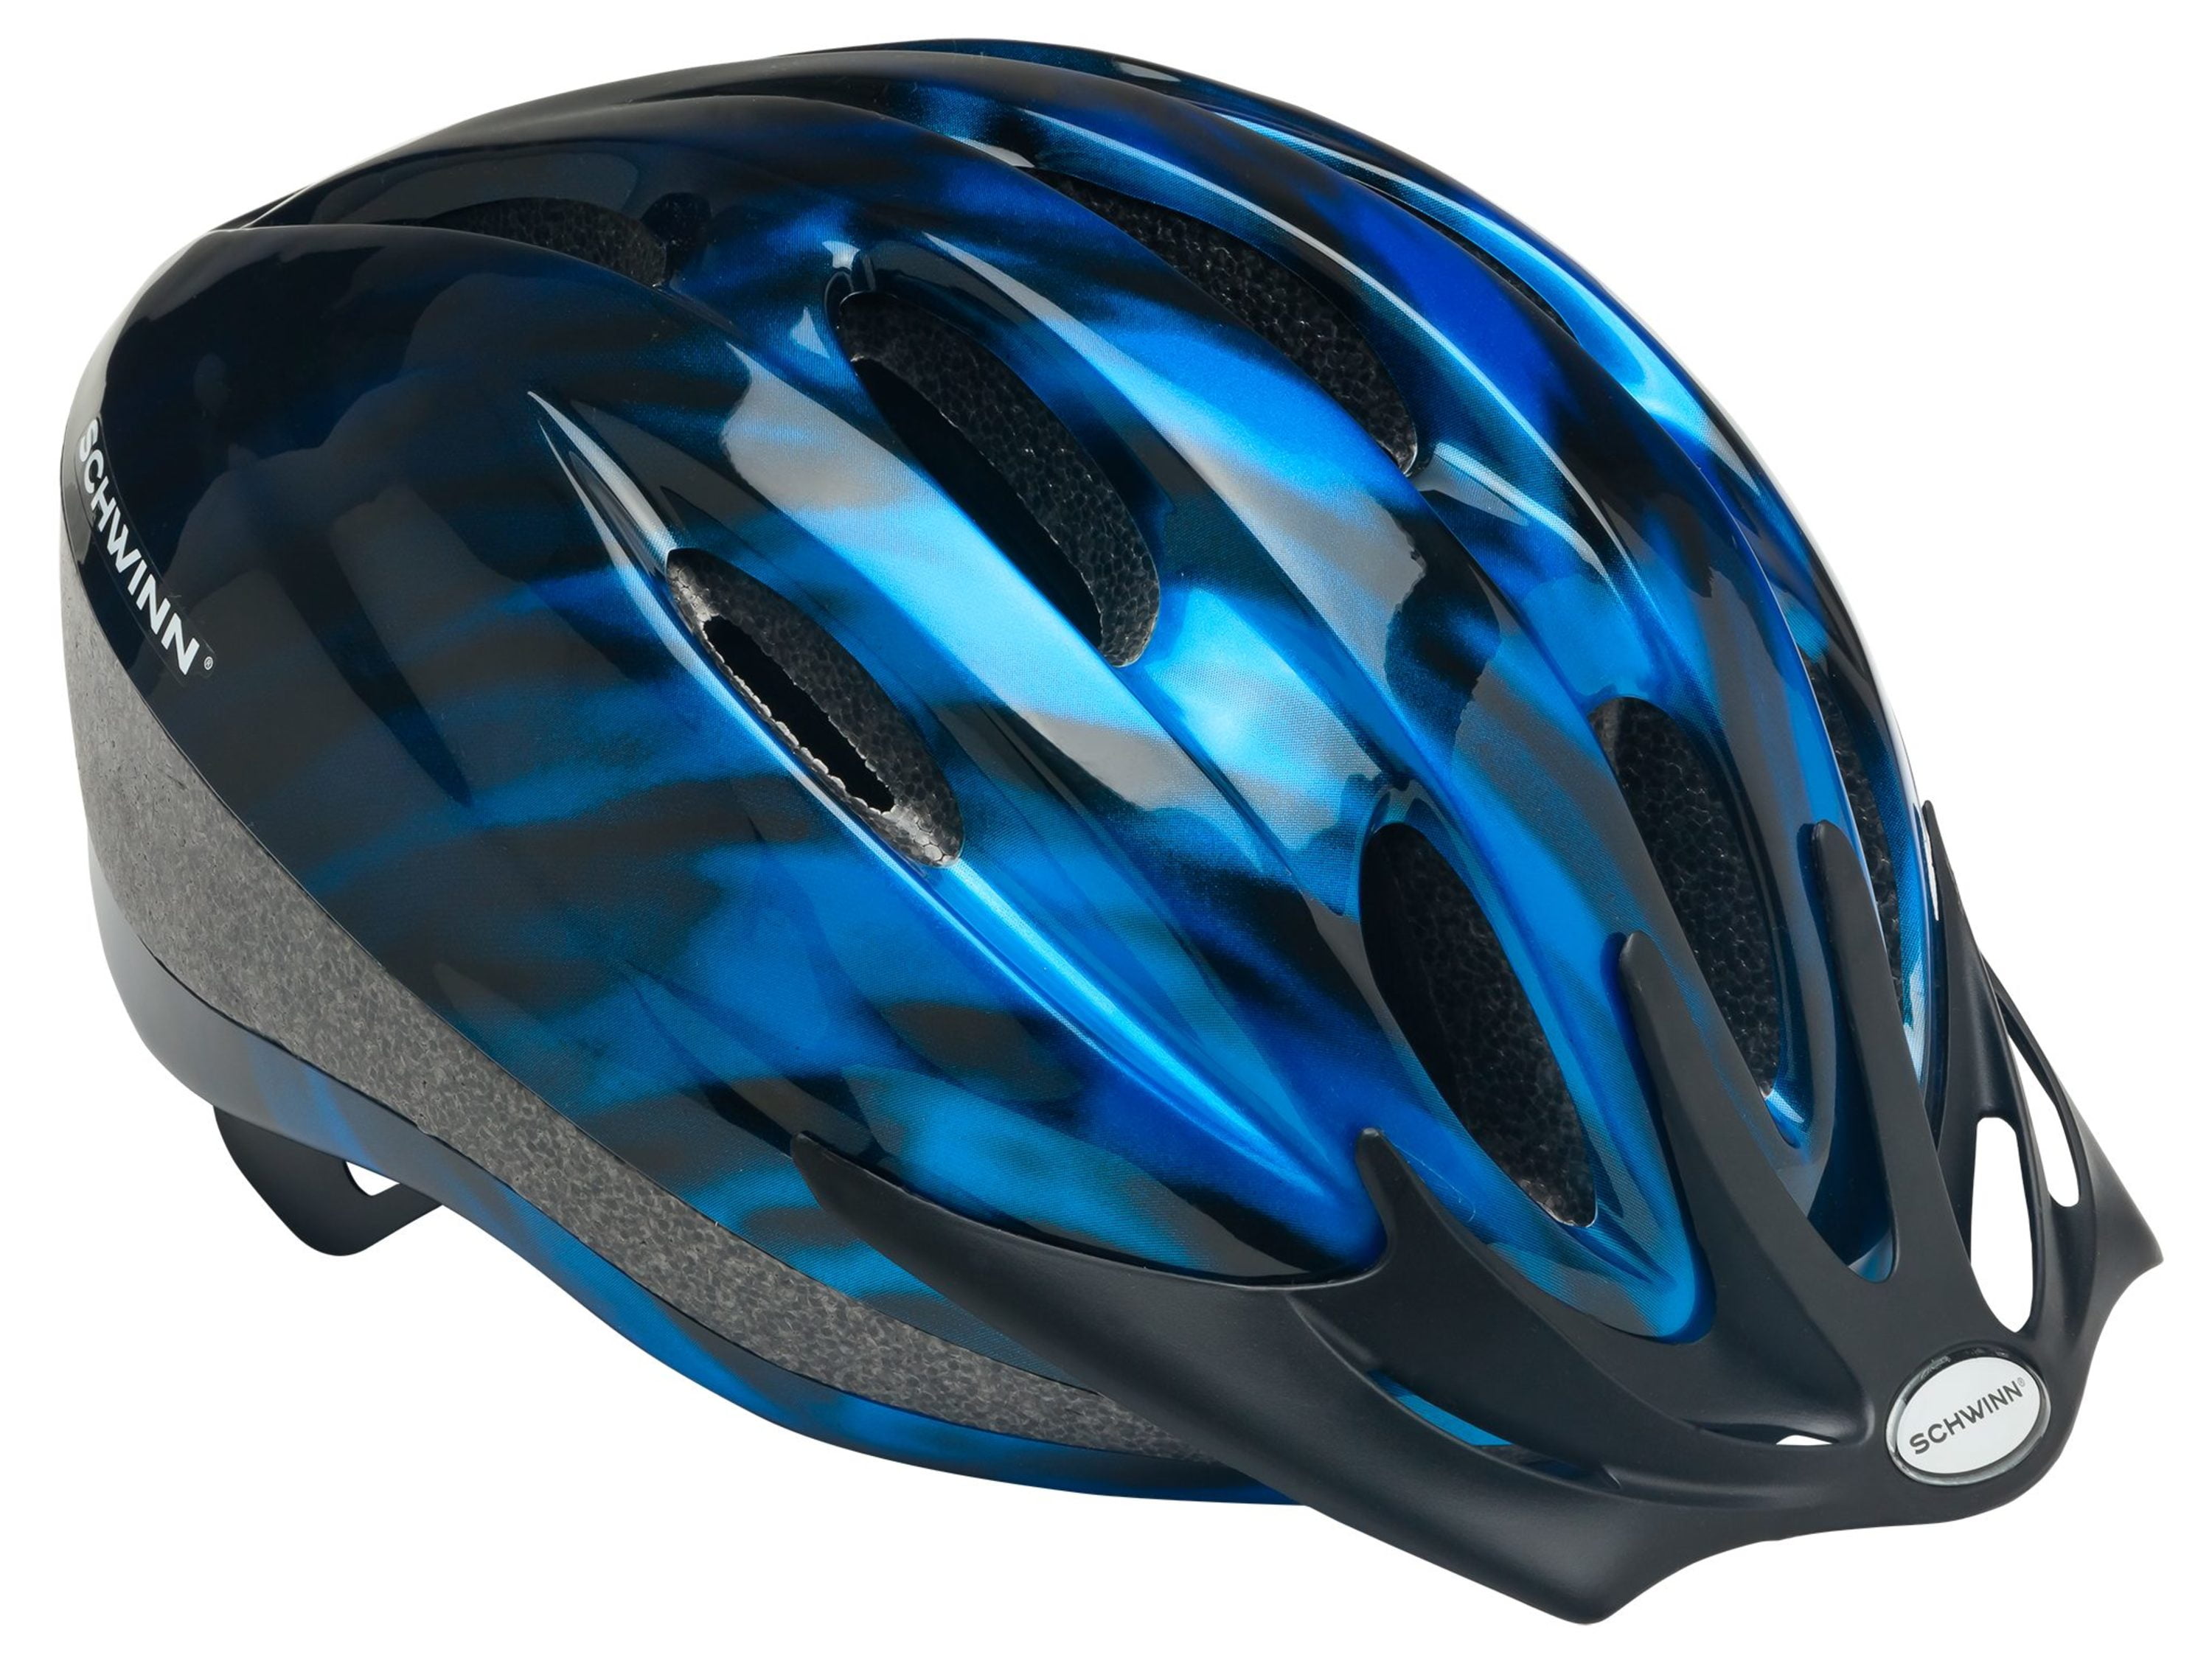 NEW Schwinn Adult Crossroad Bike Bicycle Safety Helmet ages 14 and up 